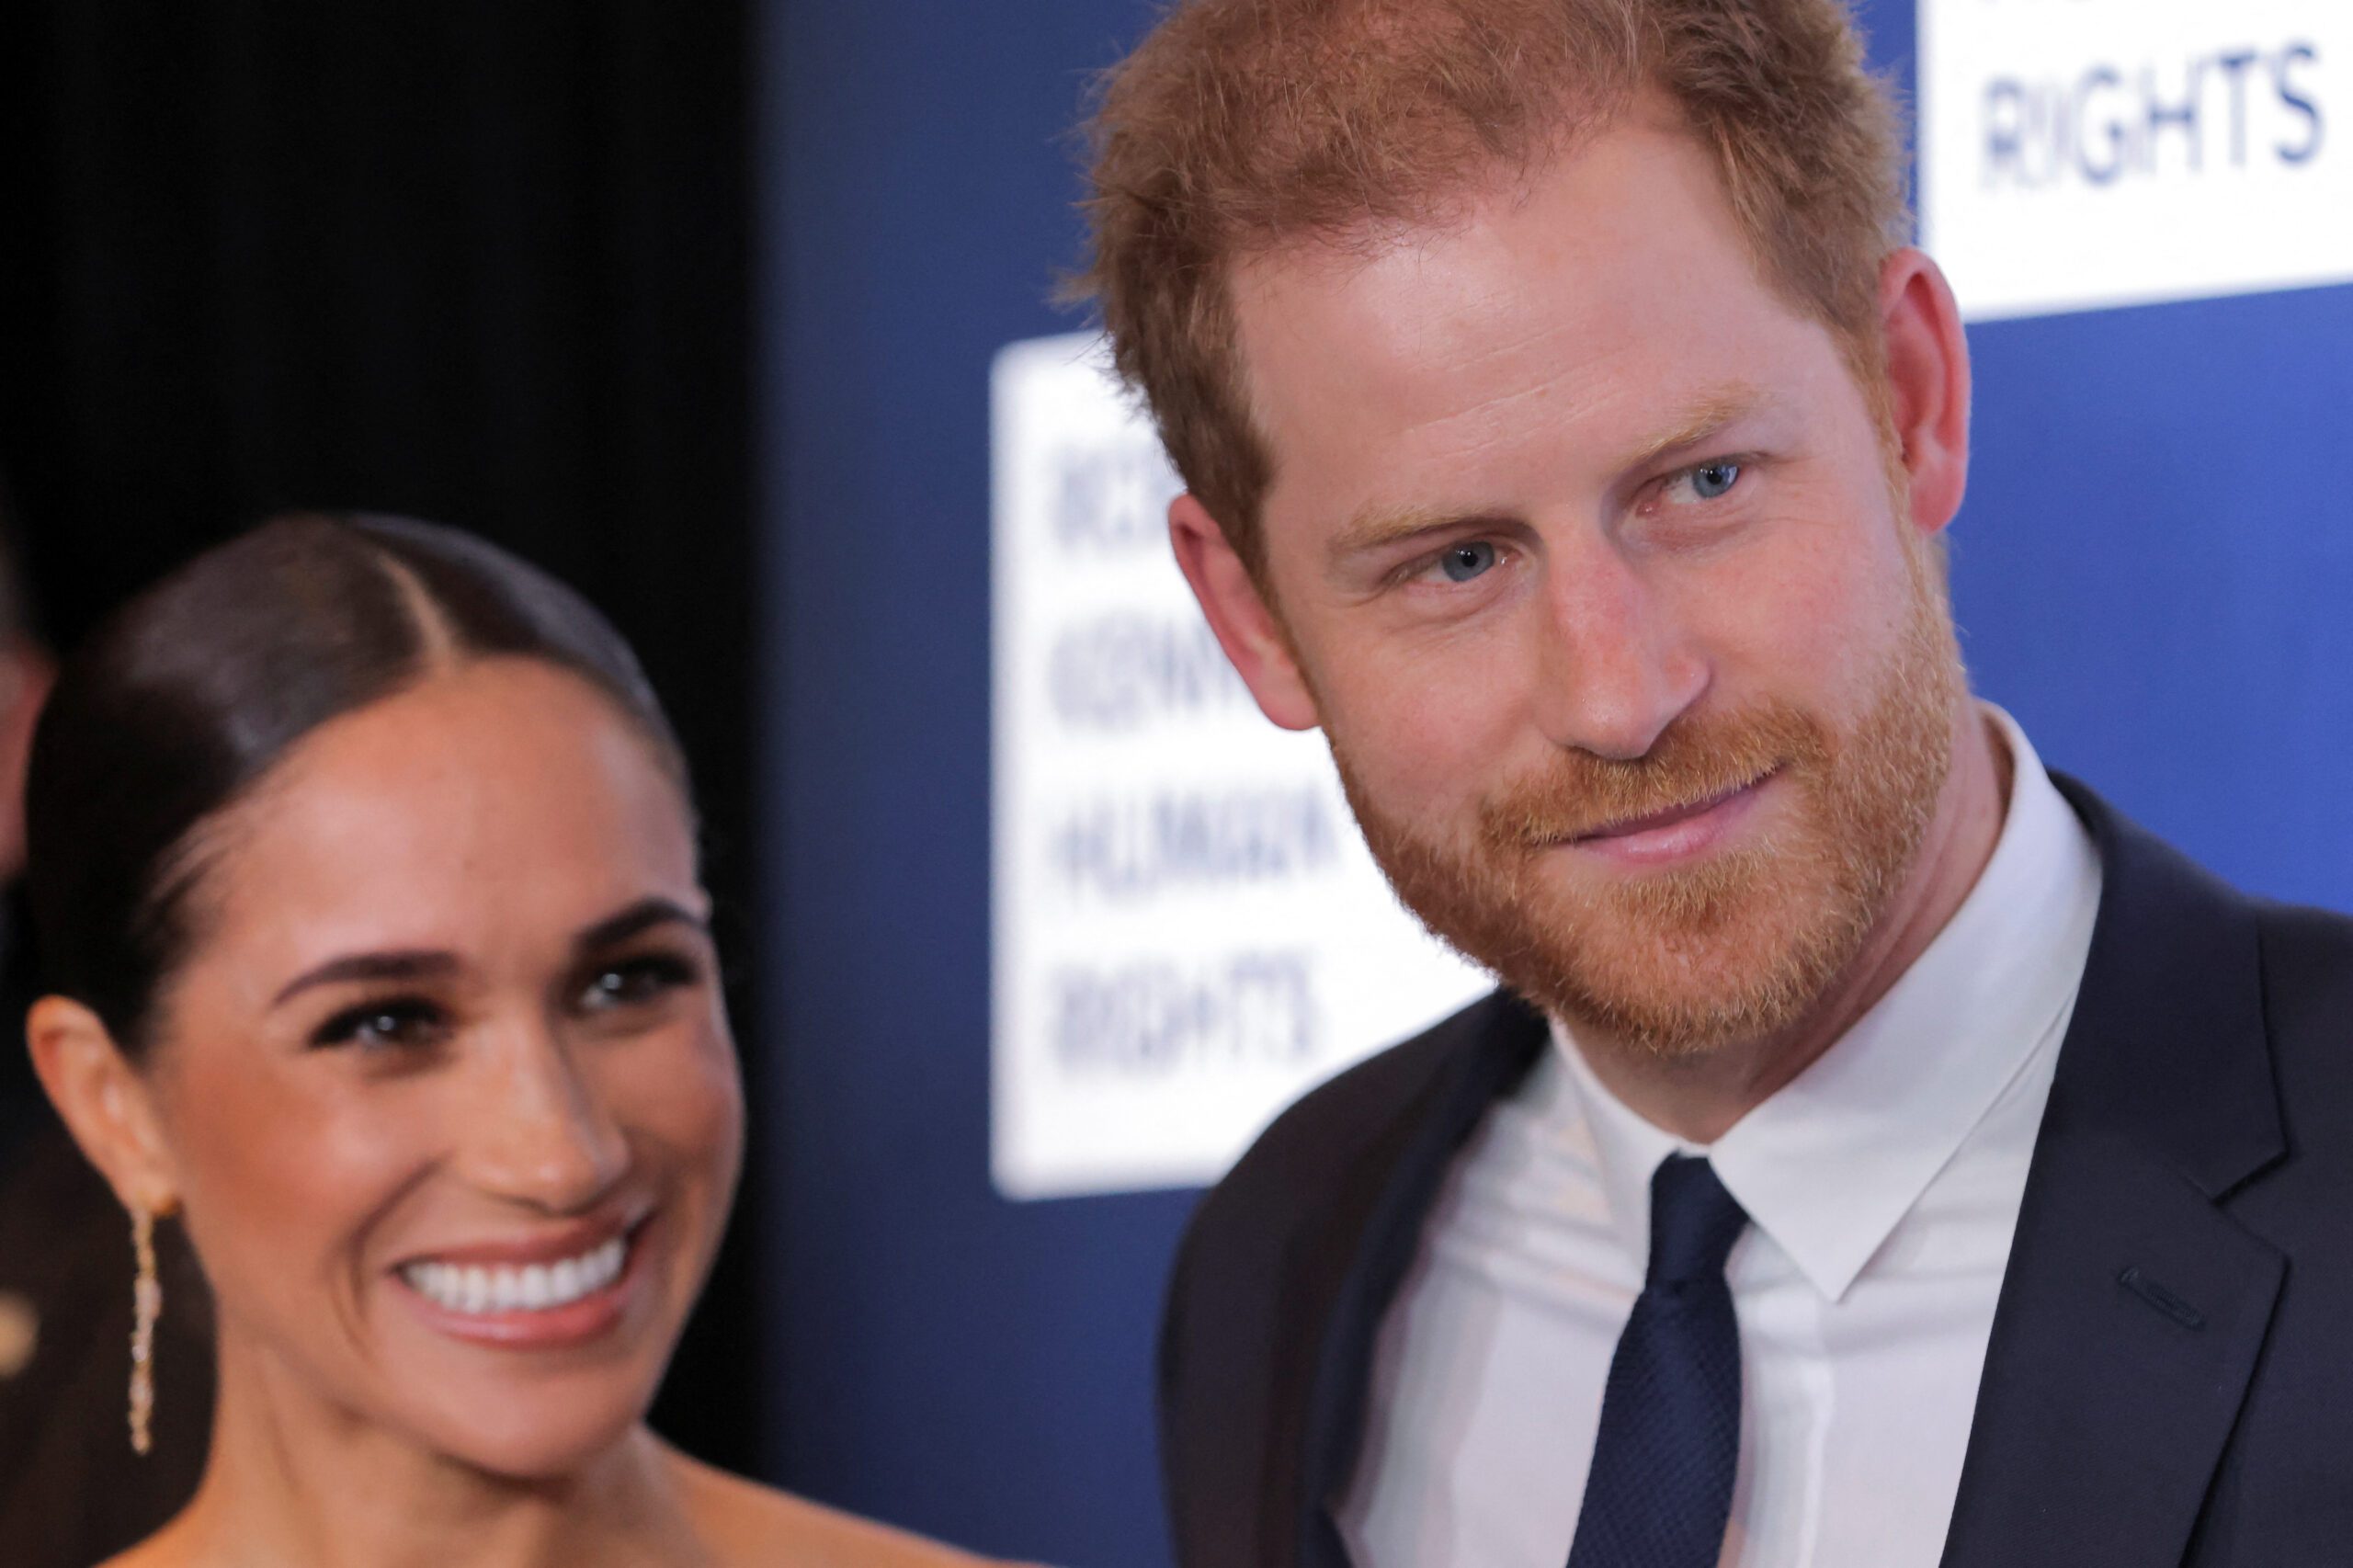 ‘Gossip behind the scenes’: Reactions to Harry and Meghan’s Netflix documentary